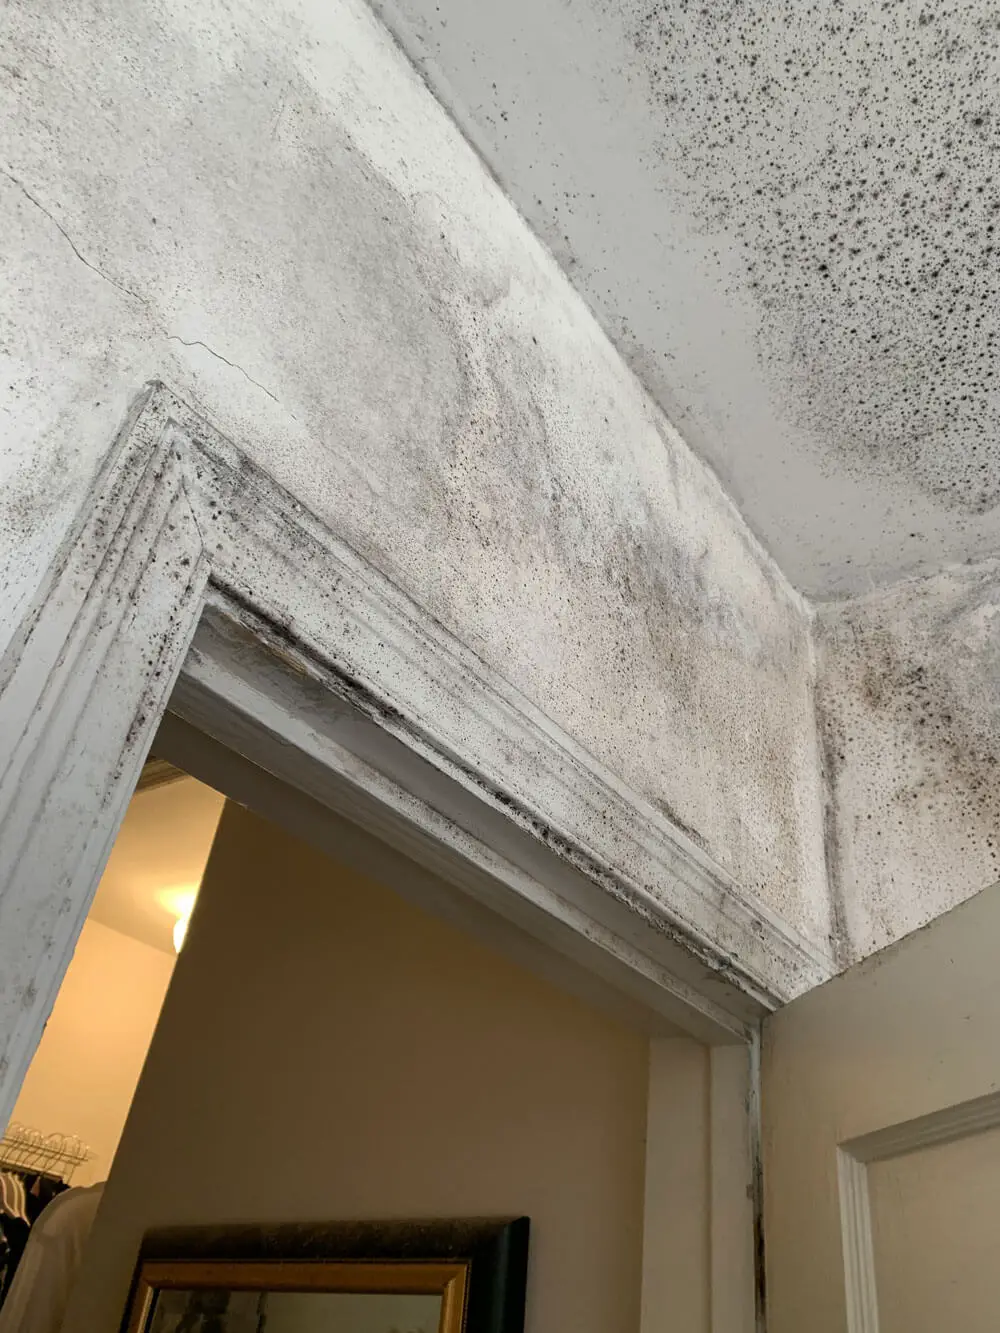 Mold on Walls and How to Remove It